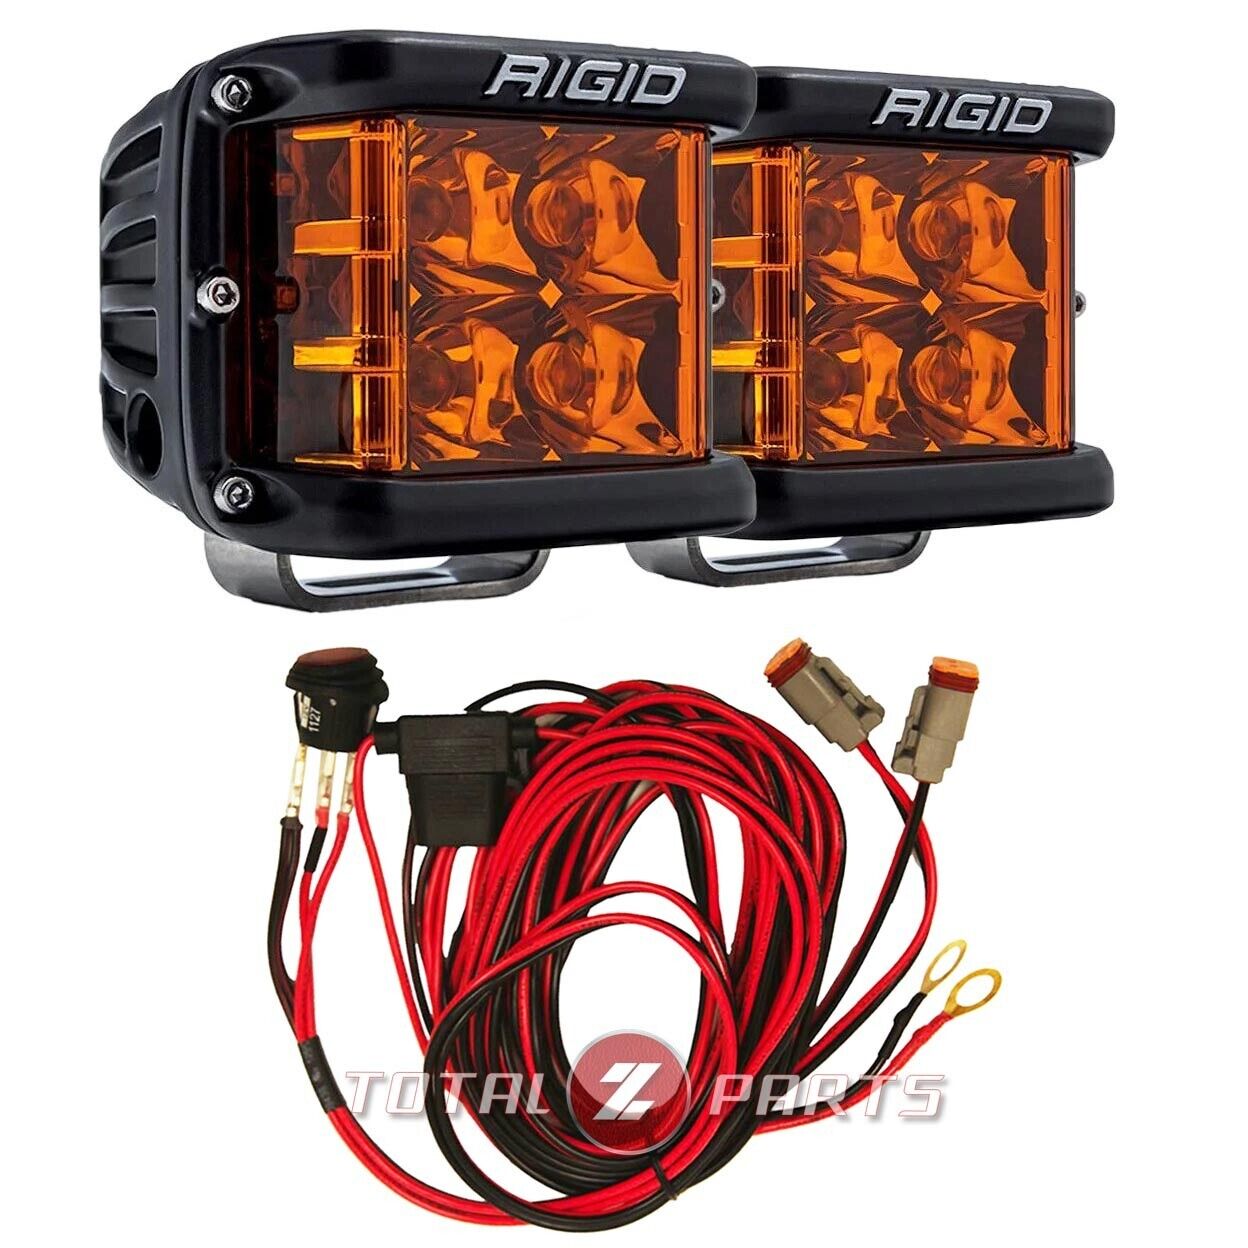 Rigid Industries® D-SS Spot Amber PRO LED Side Shooter Lights Pair w/Harness